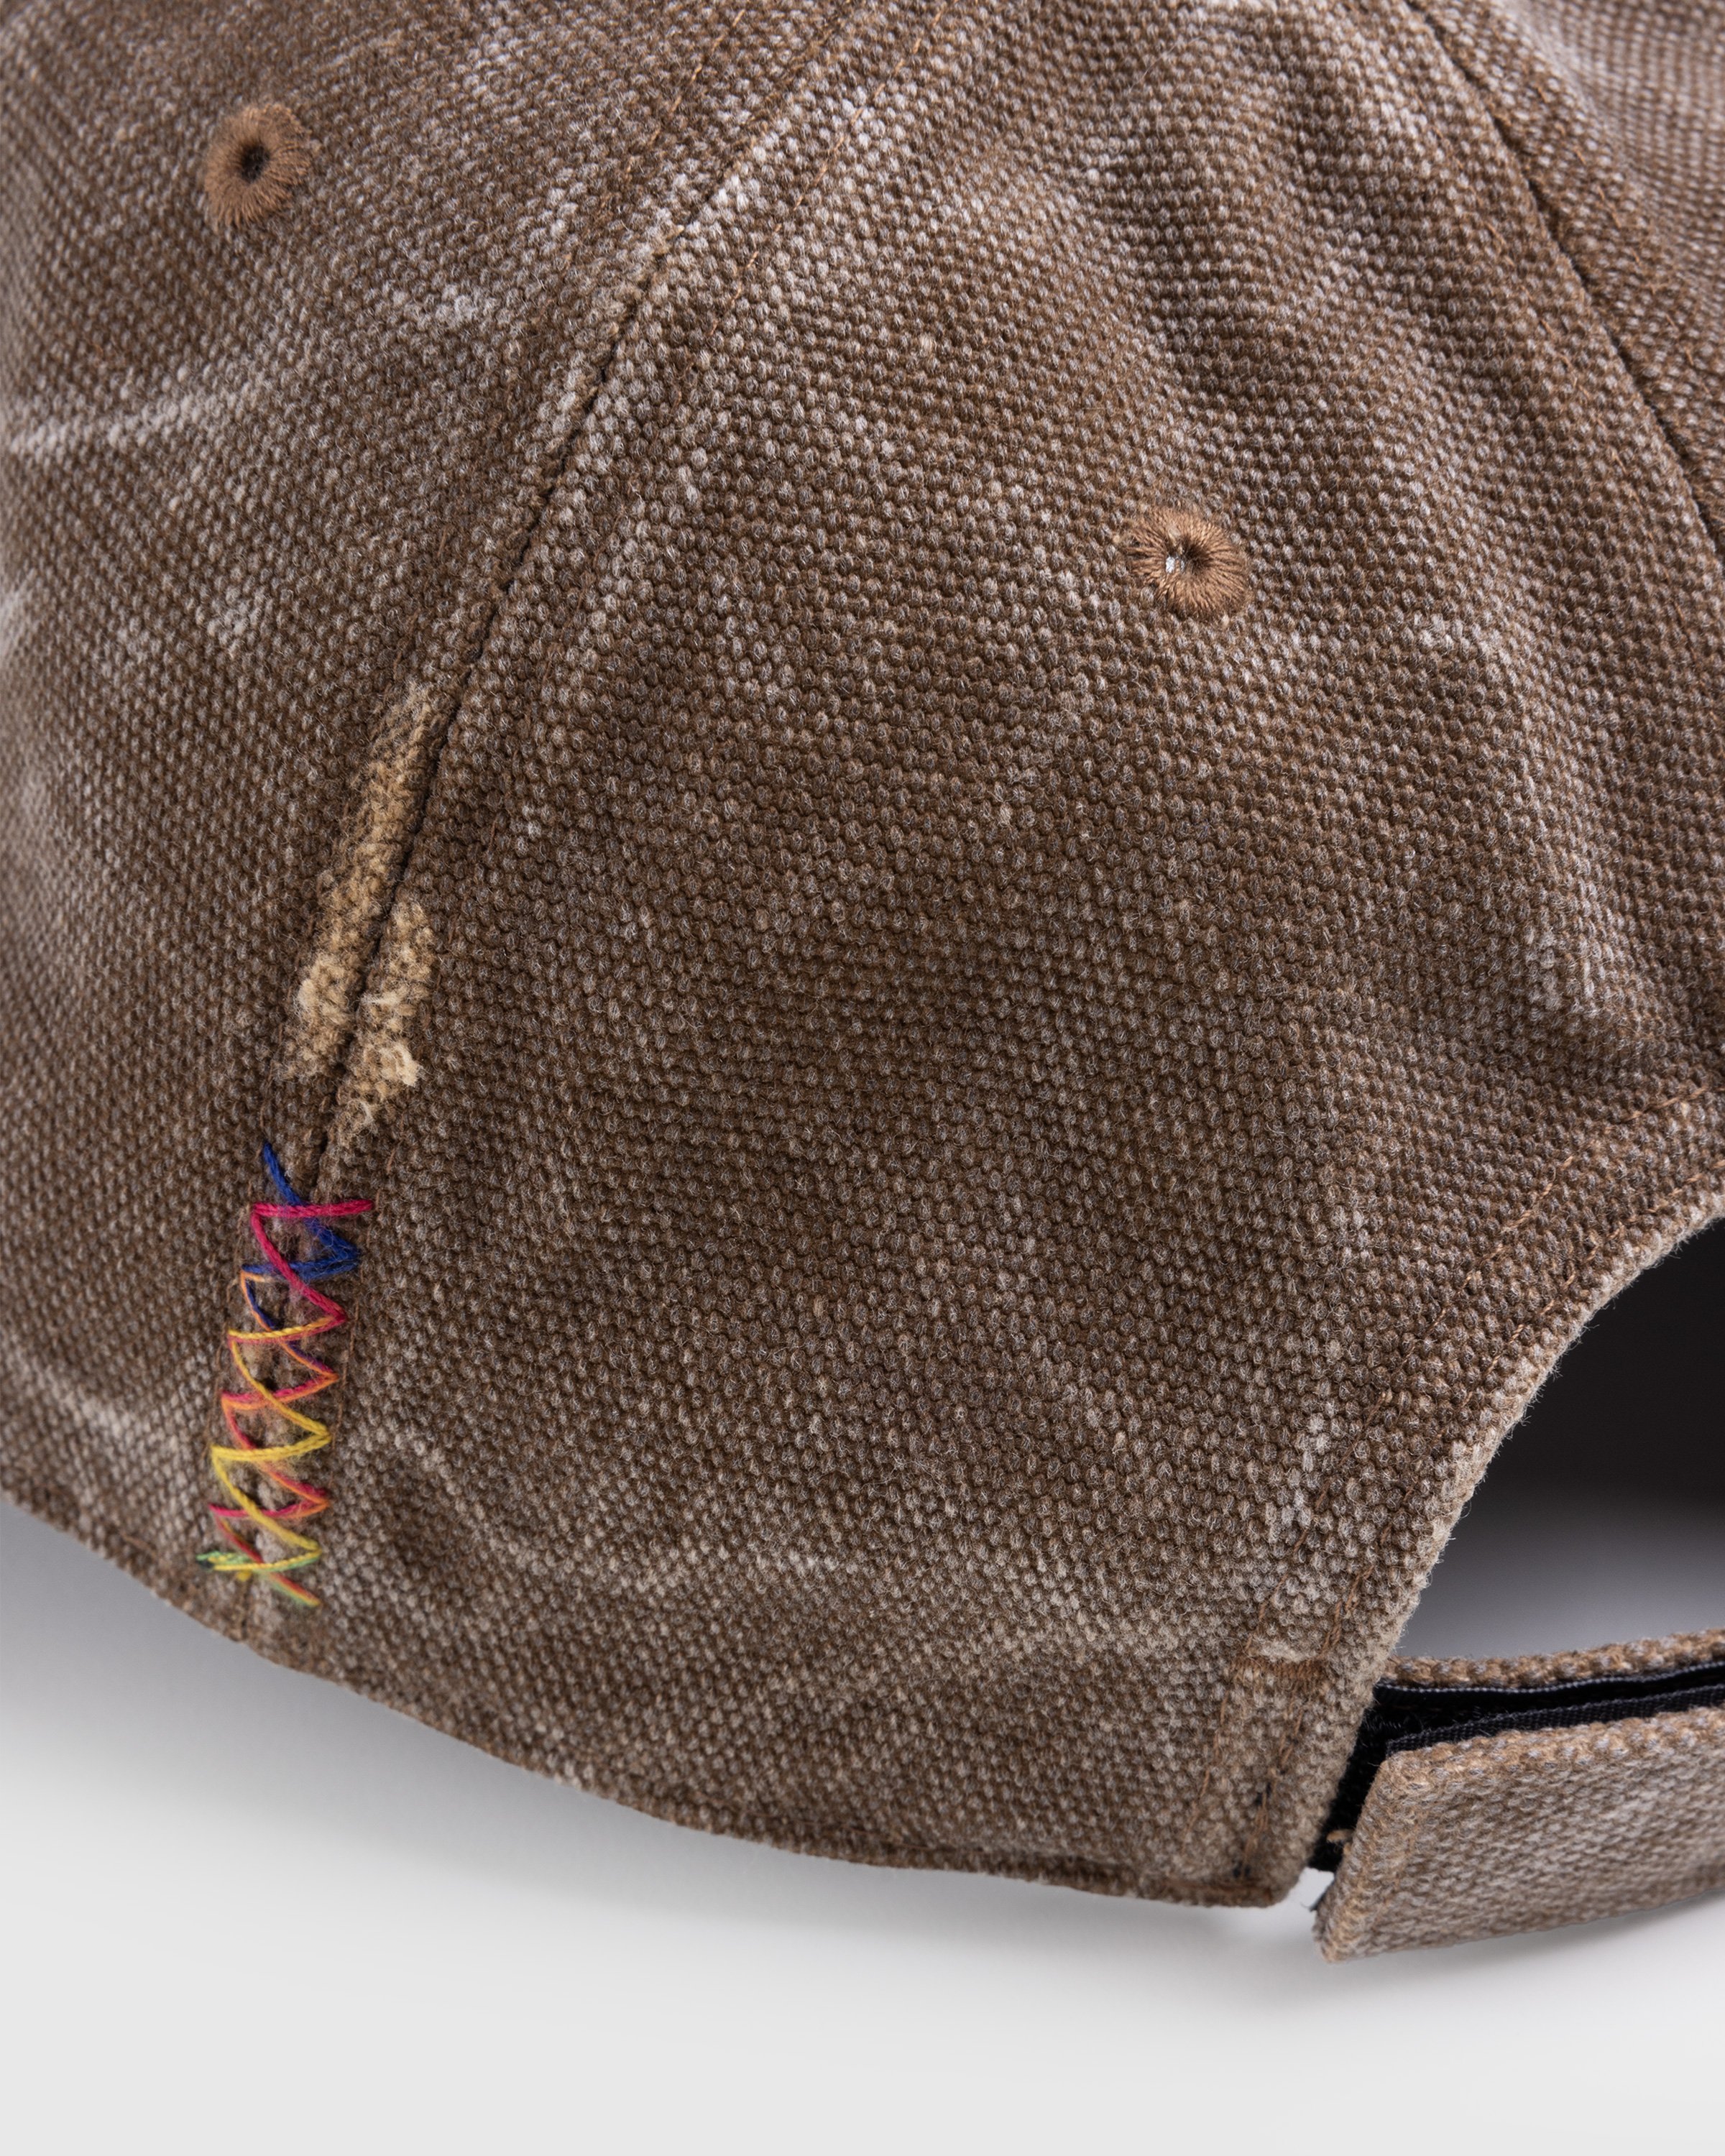 Acne Studios - Leather Face Patch Cap Toffee Brown - Accessories - Brown - Image 4